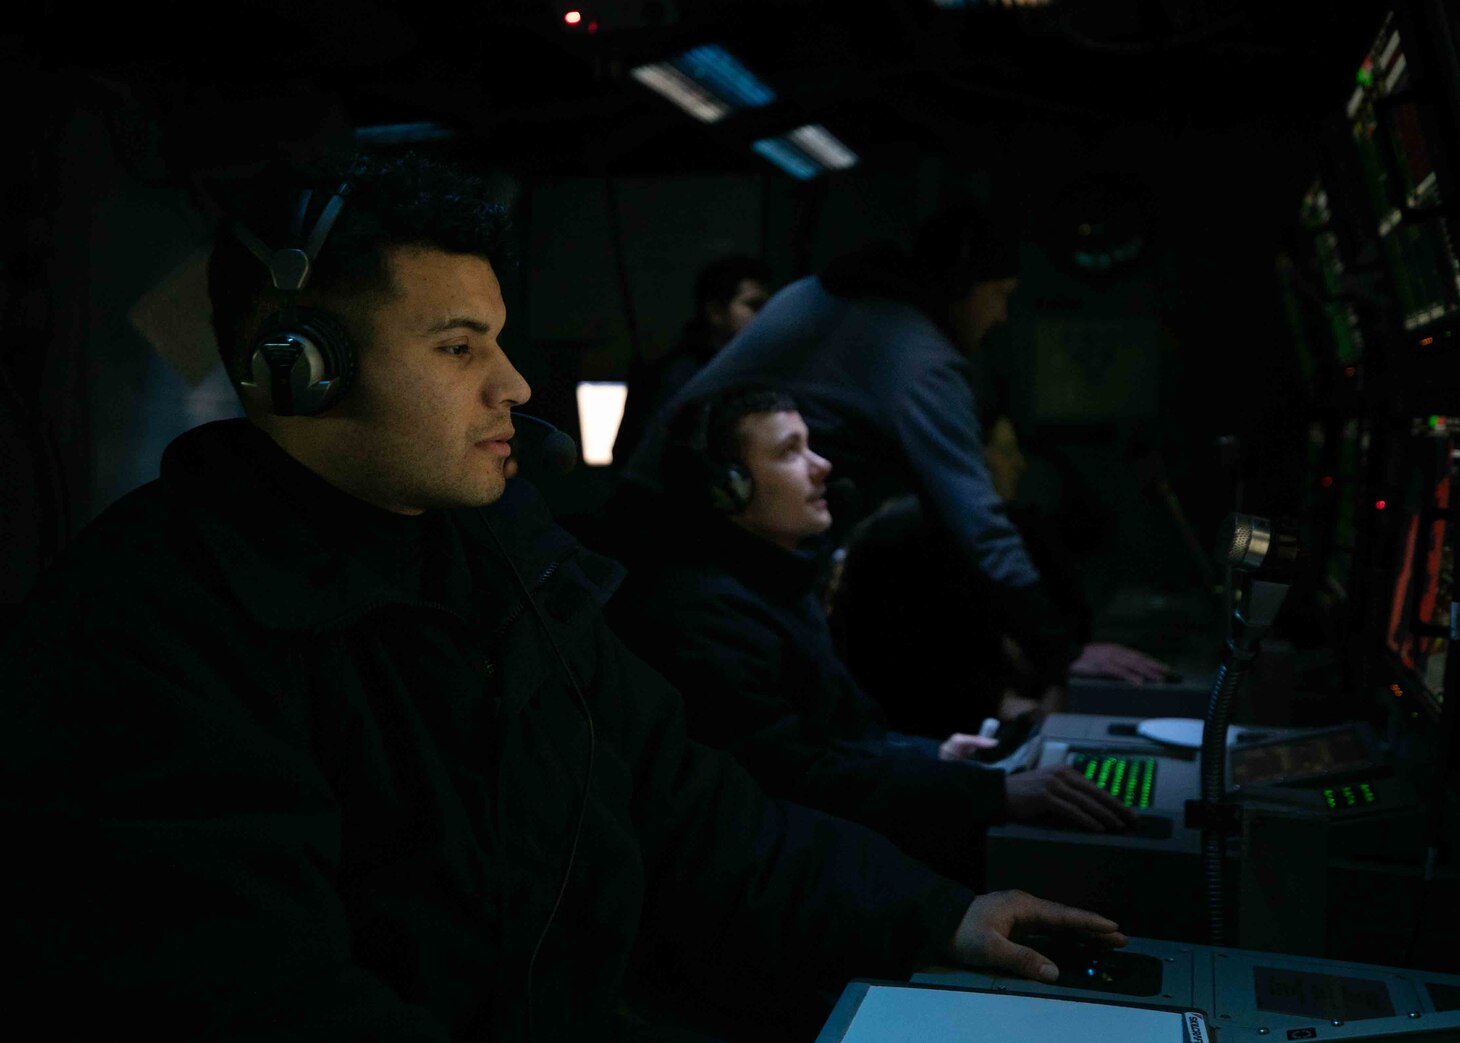 (March 8, 2023) Sonar Technician (surface) 2nd Class Jose McCarthy scans beams to search for underwater contacts aboard the Arleigh Burke-class guided-missile destroyer USS Arleigh Burke (DDG 51) during exercise Joint Warrior 23-1, March 8, 2023. Arleigh Burke is on a scheduled deployment in the U.S. Naval Forces Europe area of operations, employed by U.S. Sixth Fleet to defend U.S., allied and partner interests.